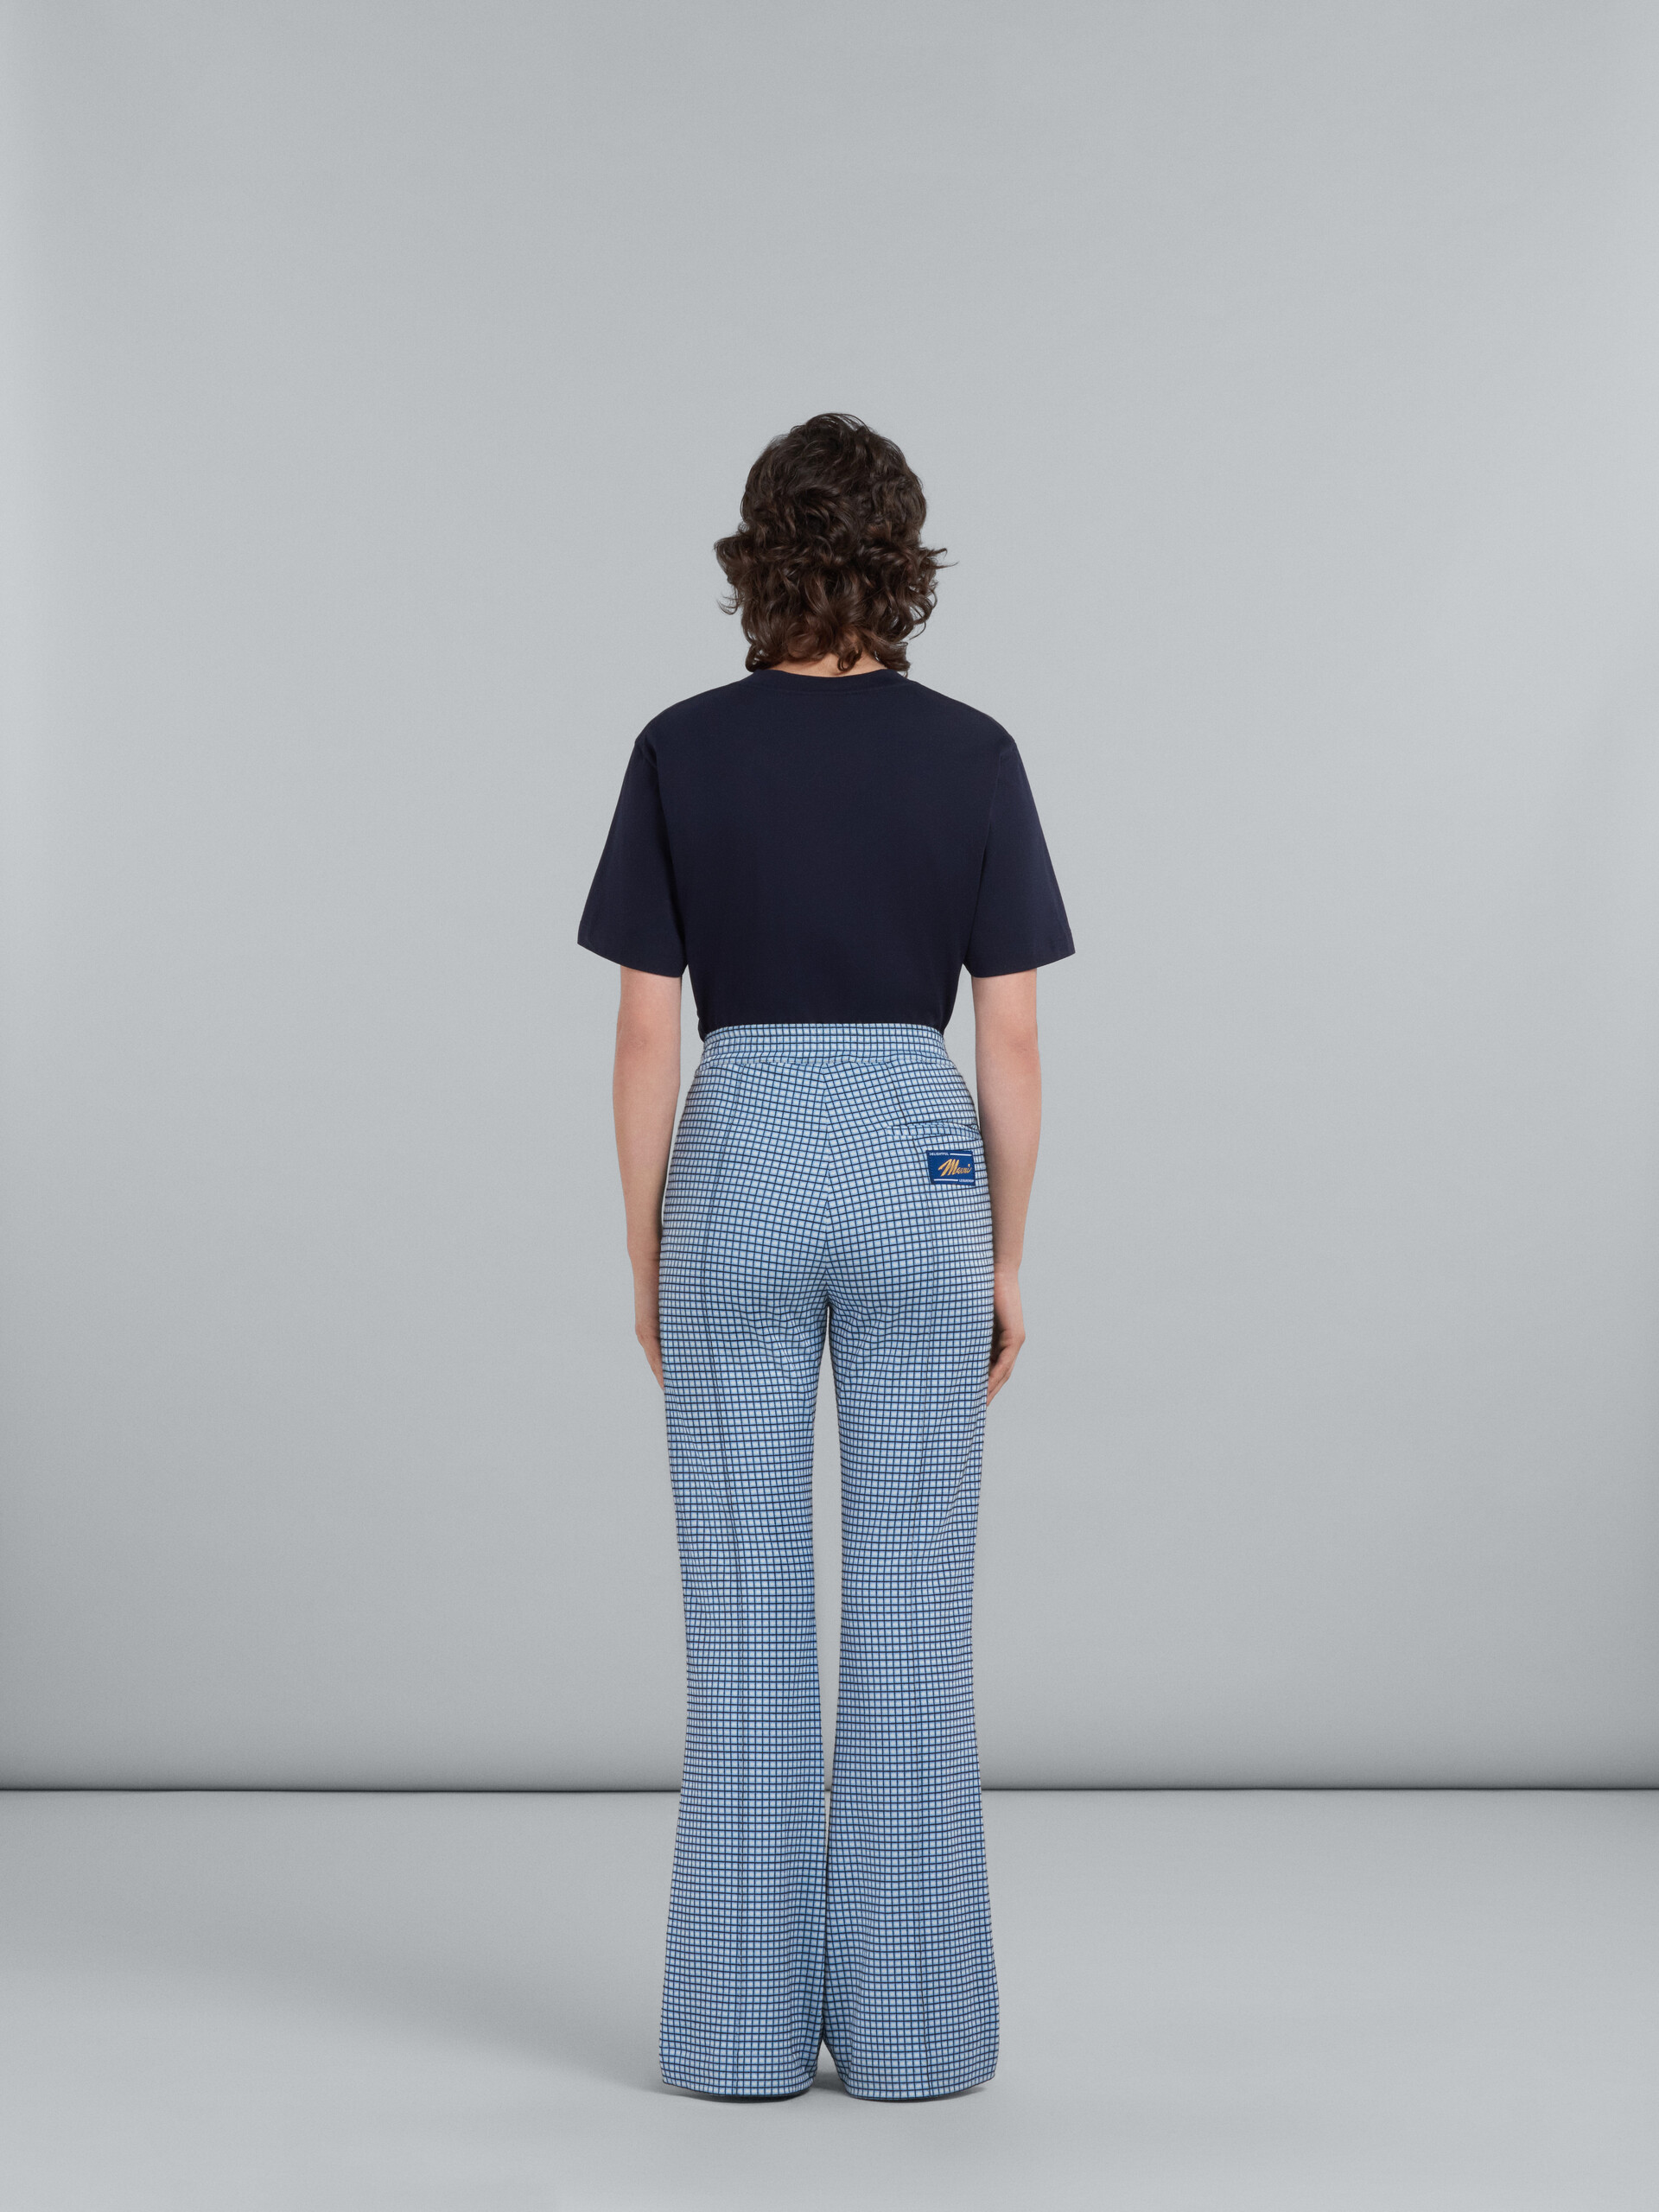 Flared trousers in light blue jacquard fabric - Pants - Image 3